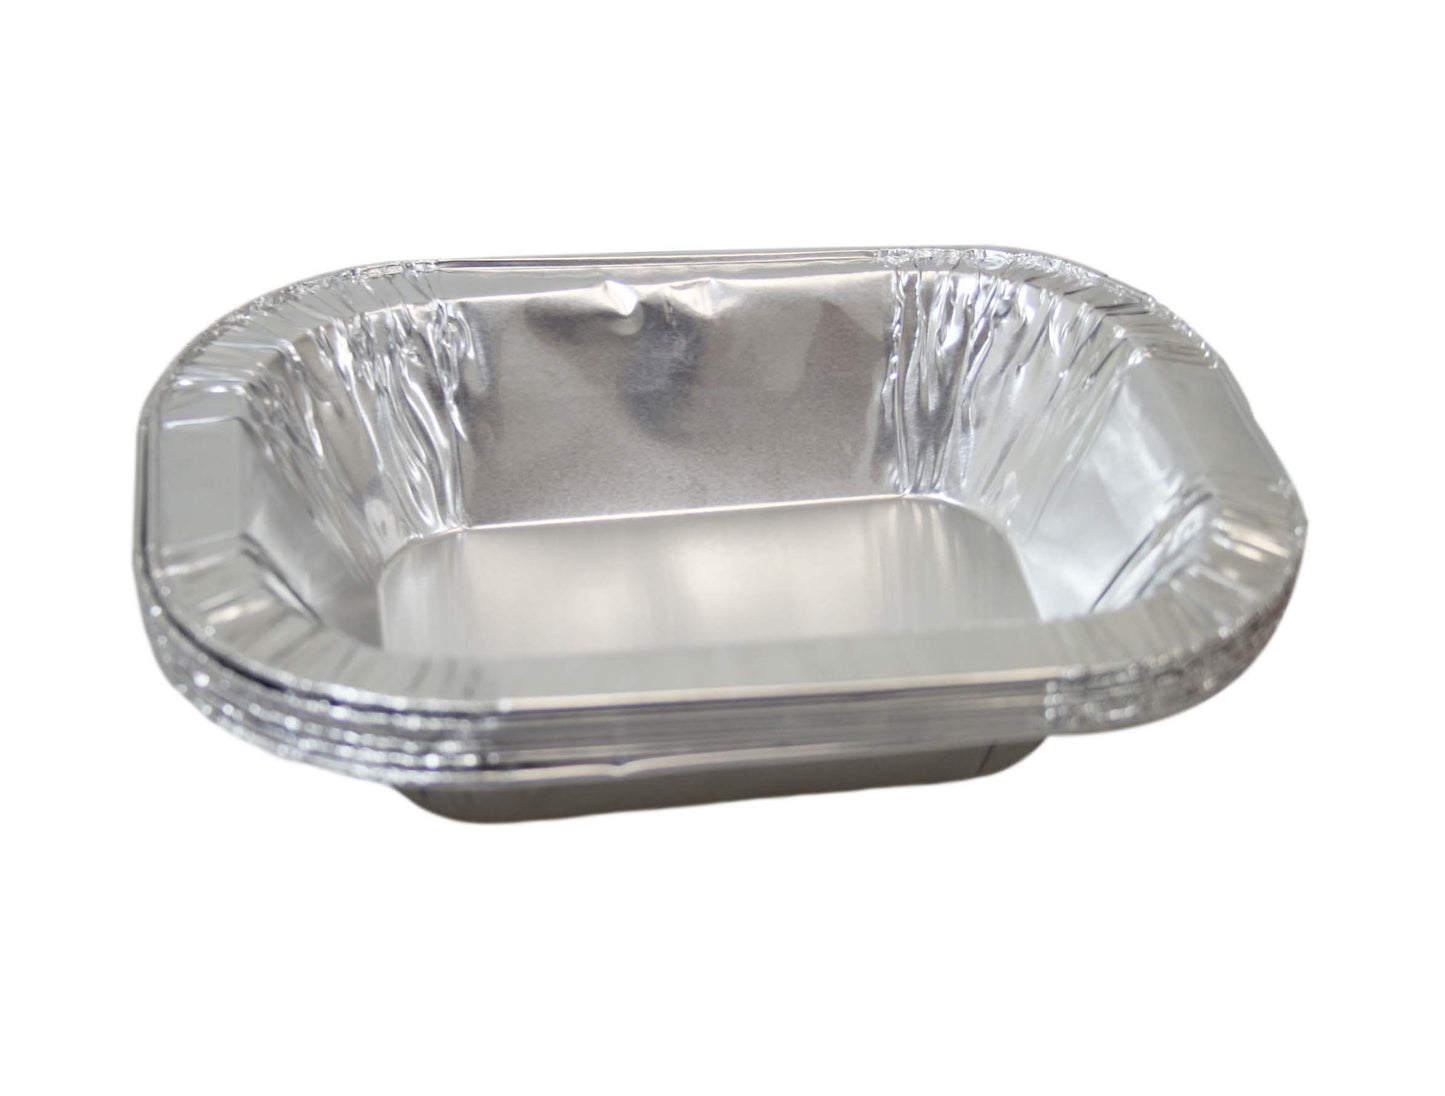 Oval Foil Pie Dish Takeaway Serving Foil Dishes Ideal For Food And Dessert 19.5cm x 5.2cm 6 Pack 0357 (Parcel Rate)